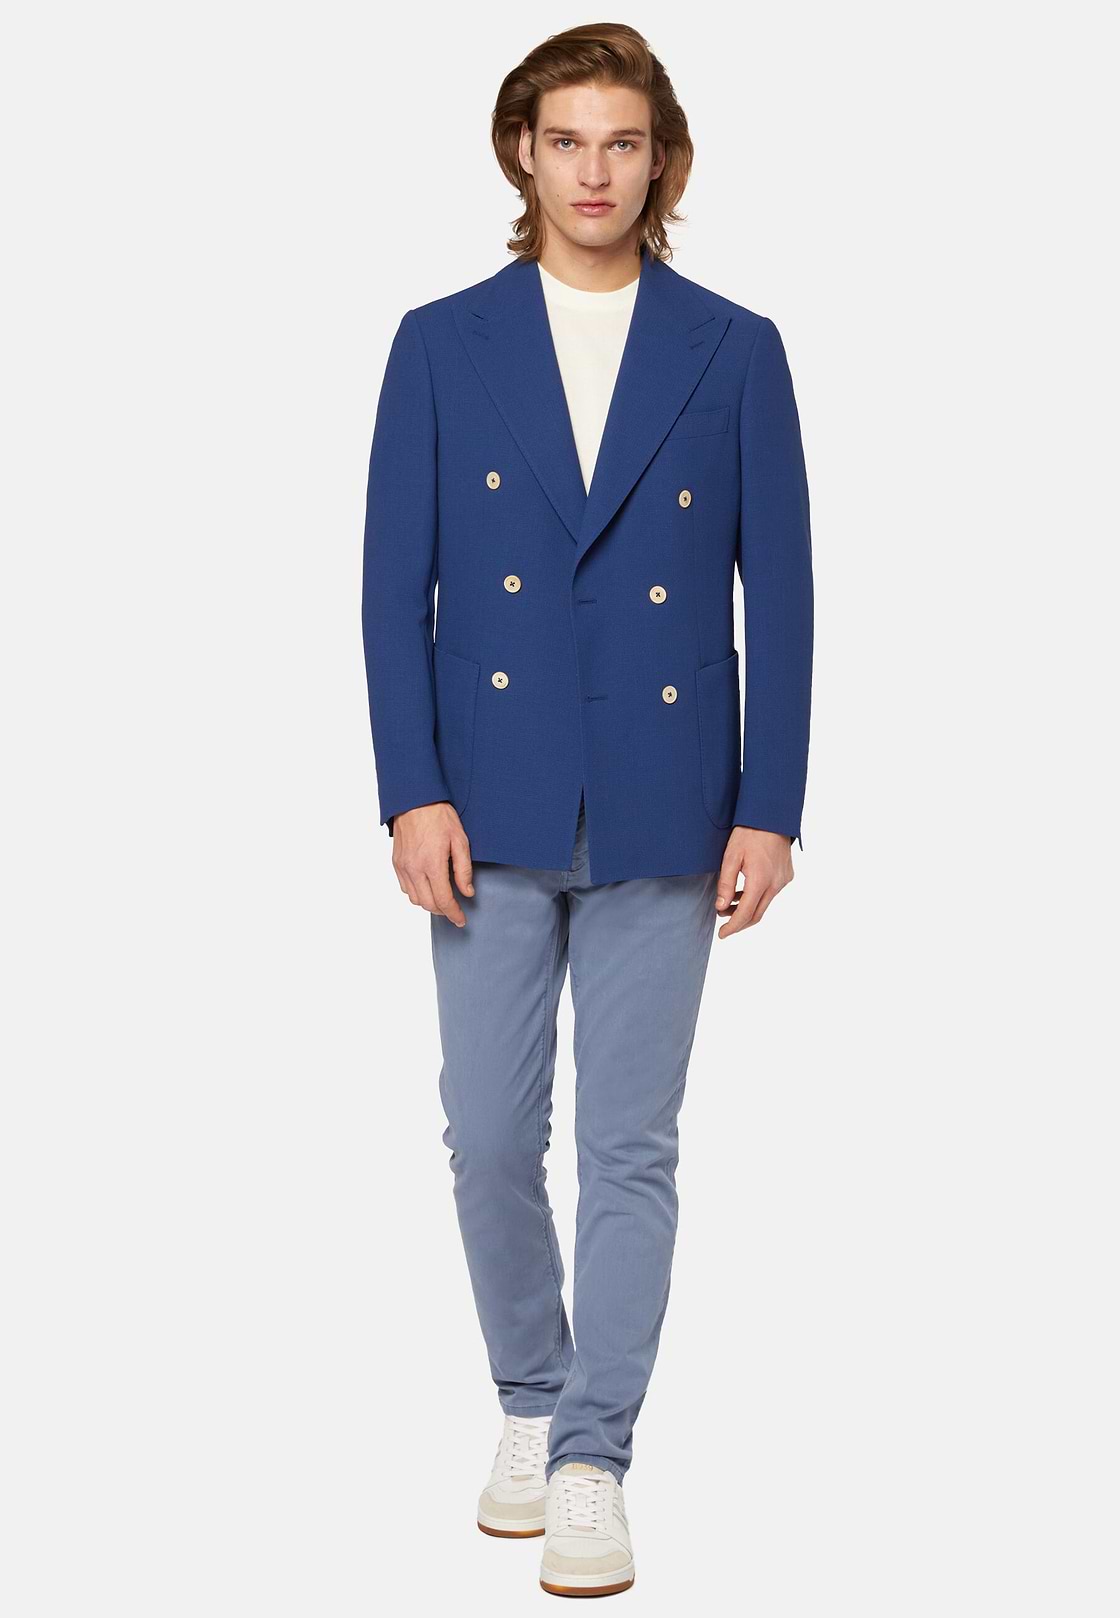 Blue Double-Breasted Jacket In Pure Wool Crepe, Blue, hi-res